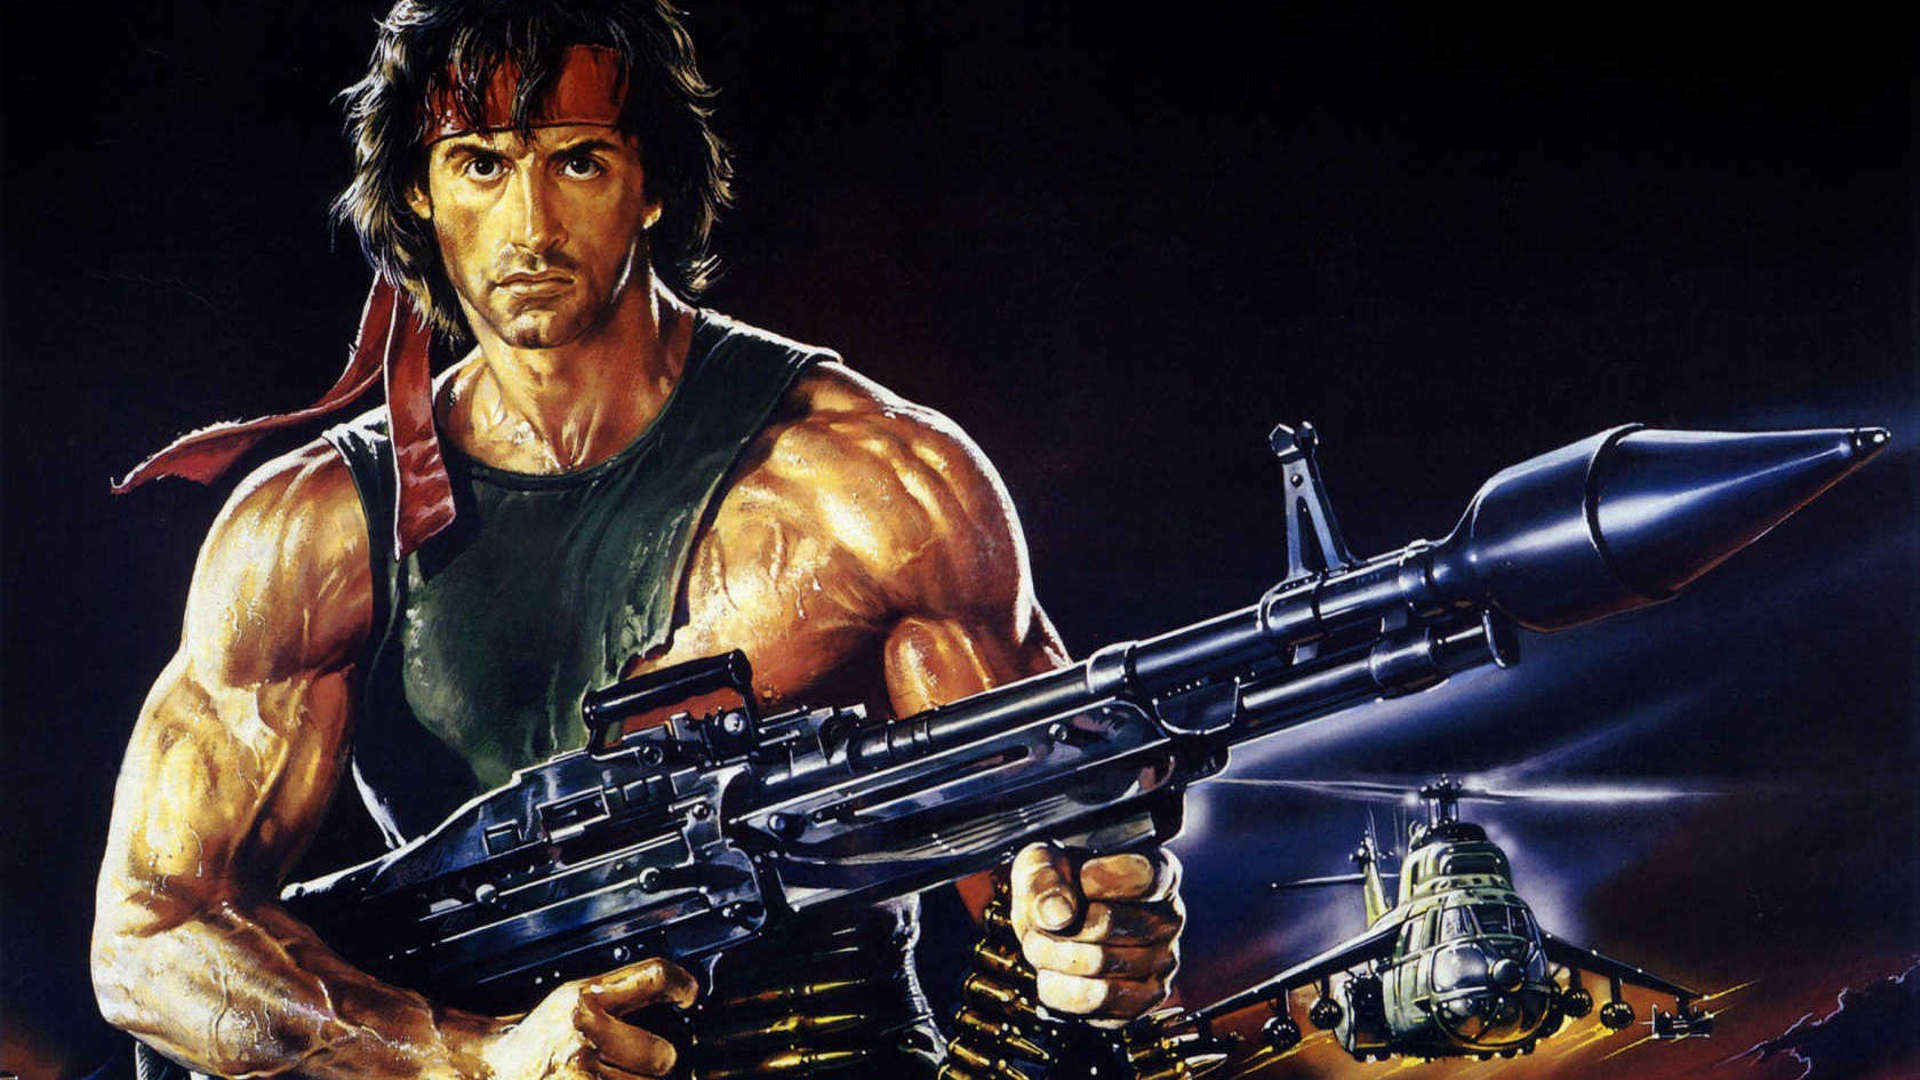 VFX course poster for Industry Survival Workshop showing Sylvester Stallone holding a Bazooka.